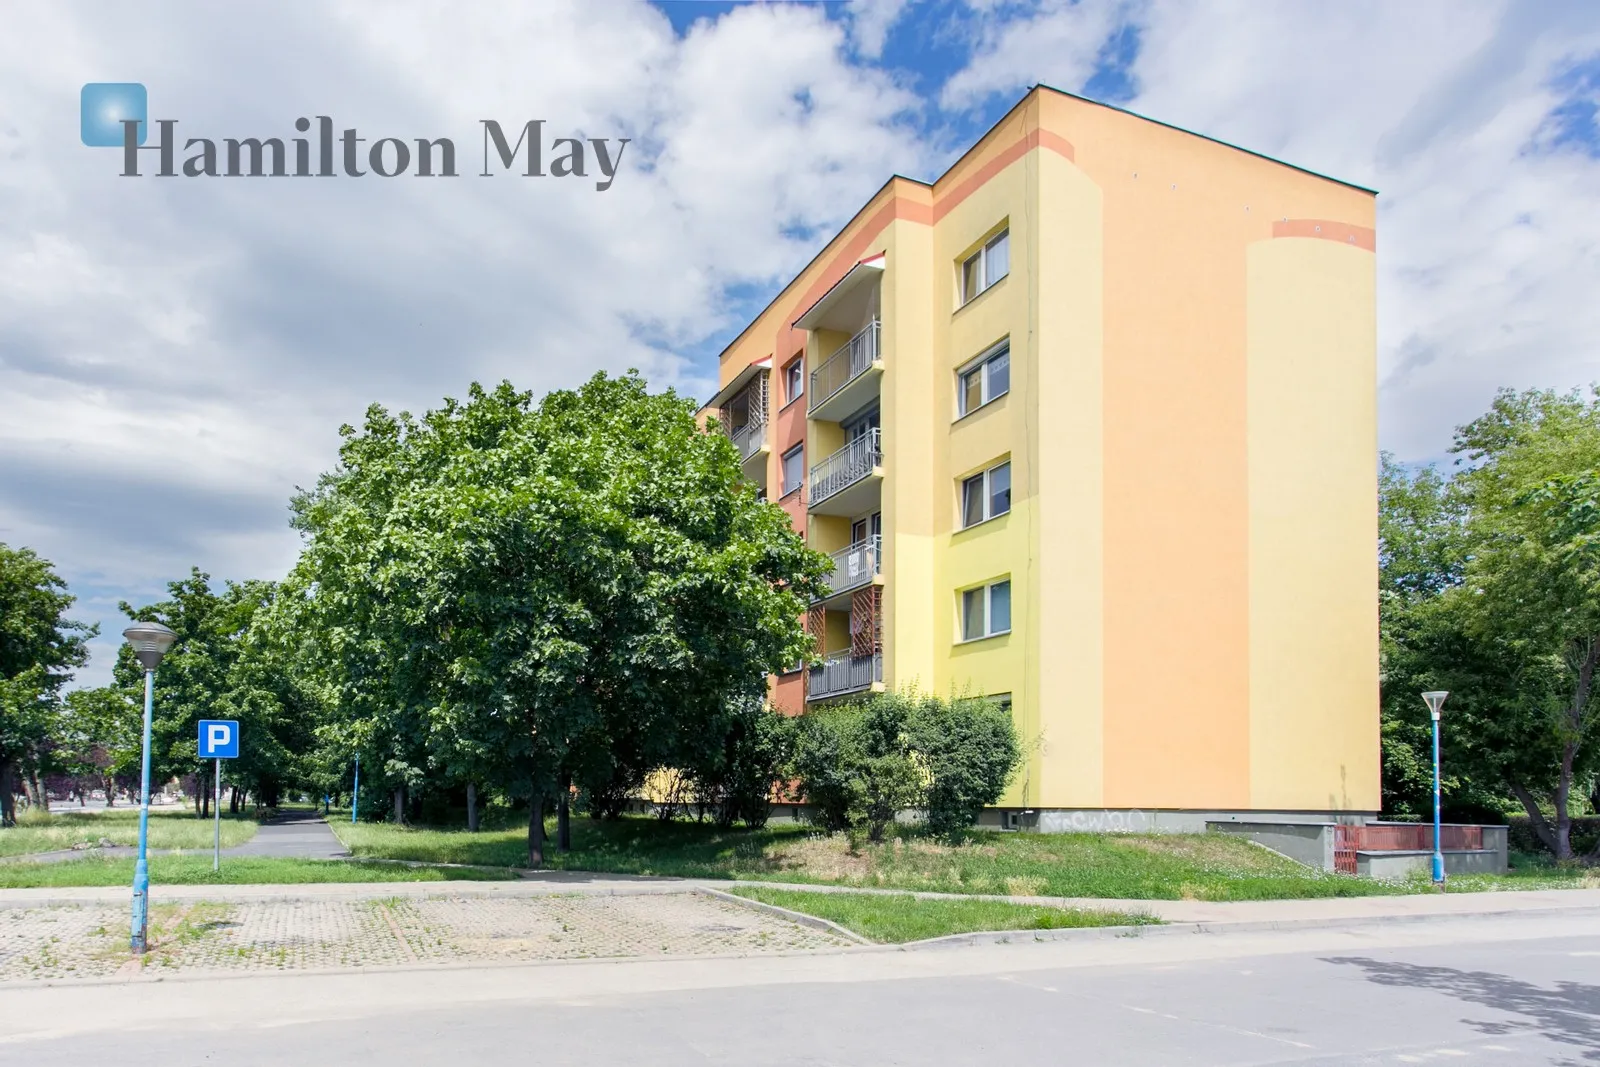 Subregion: Nowy dwór Distance to centre: 5.73 km Level: 4 Price: 789000 PLN Bedrooms: 2 Bathrooms: 1